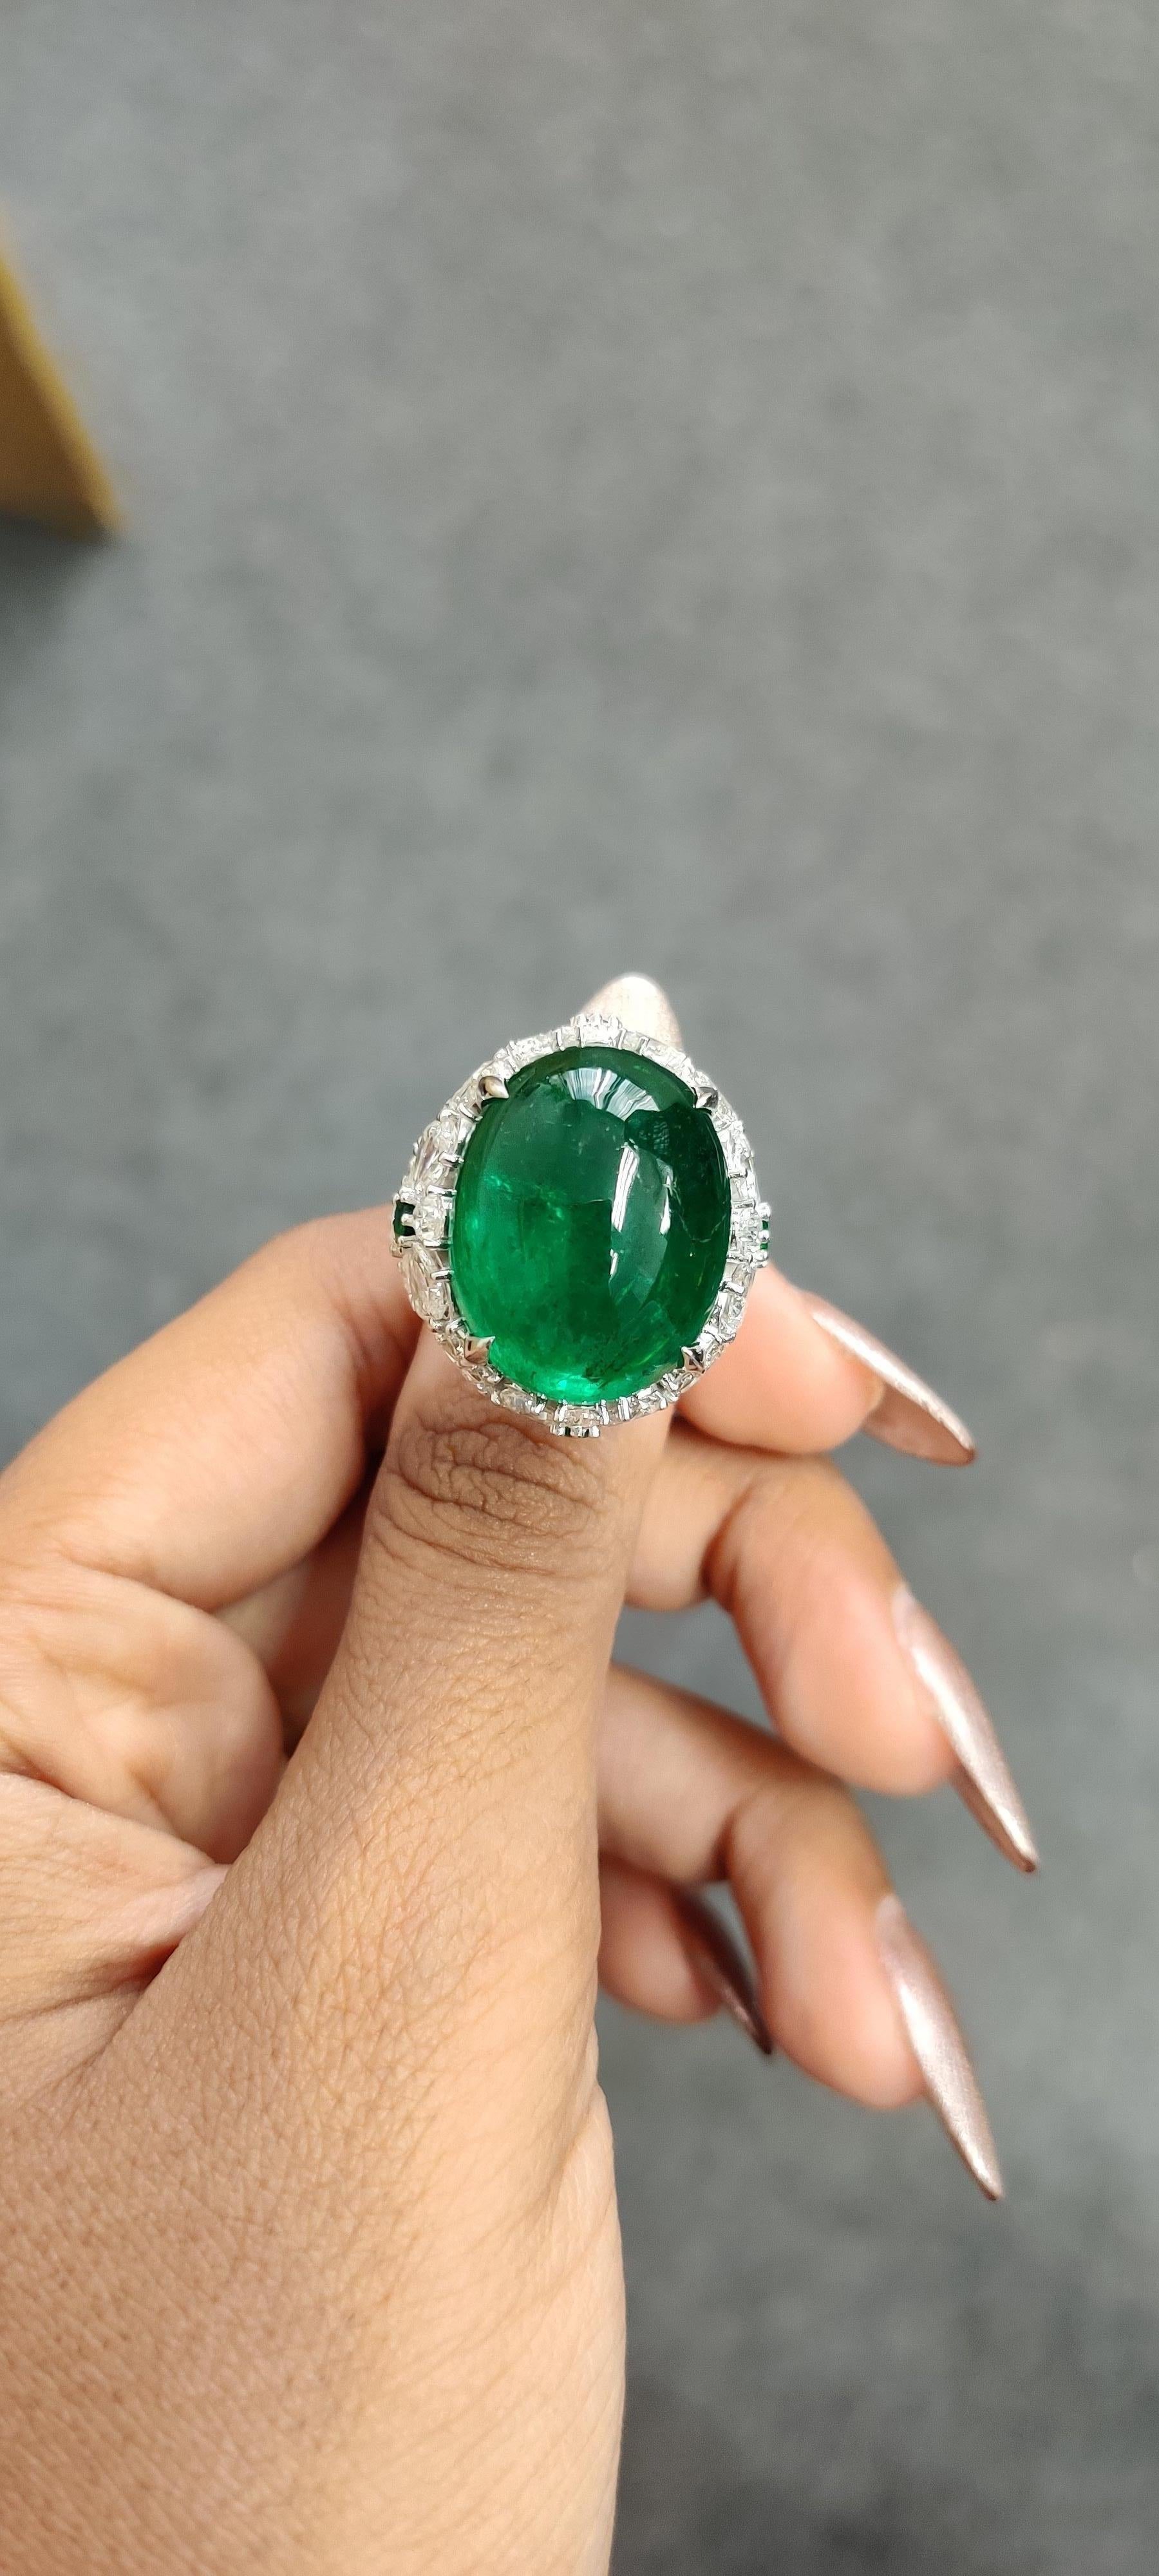 Presenting this utterly breath-taking and substantial piece of jewelry, we proudly showcase a tremendous 24.60 Carat Cabochon Emerald. Sourced from the enchanting mines of Zambia, this exceptional gem has undergone only minor oil treatment,